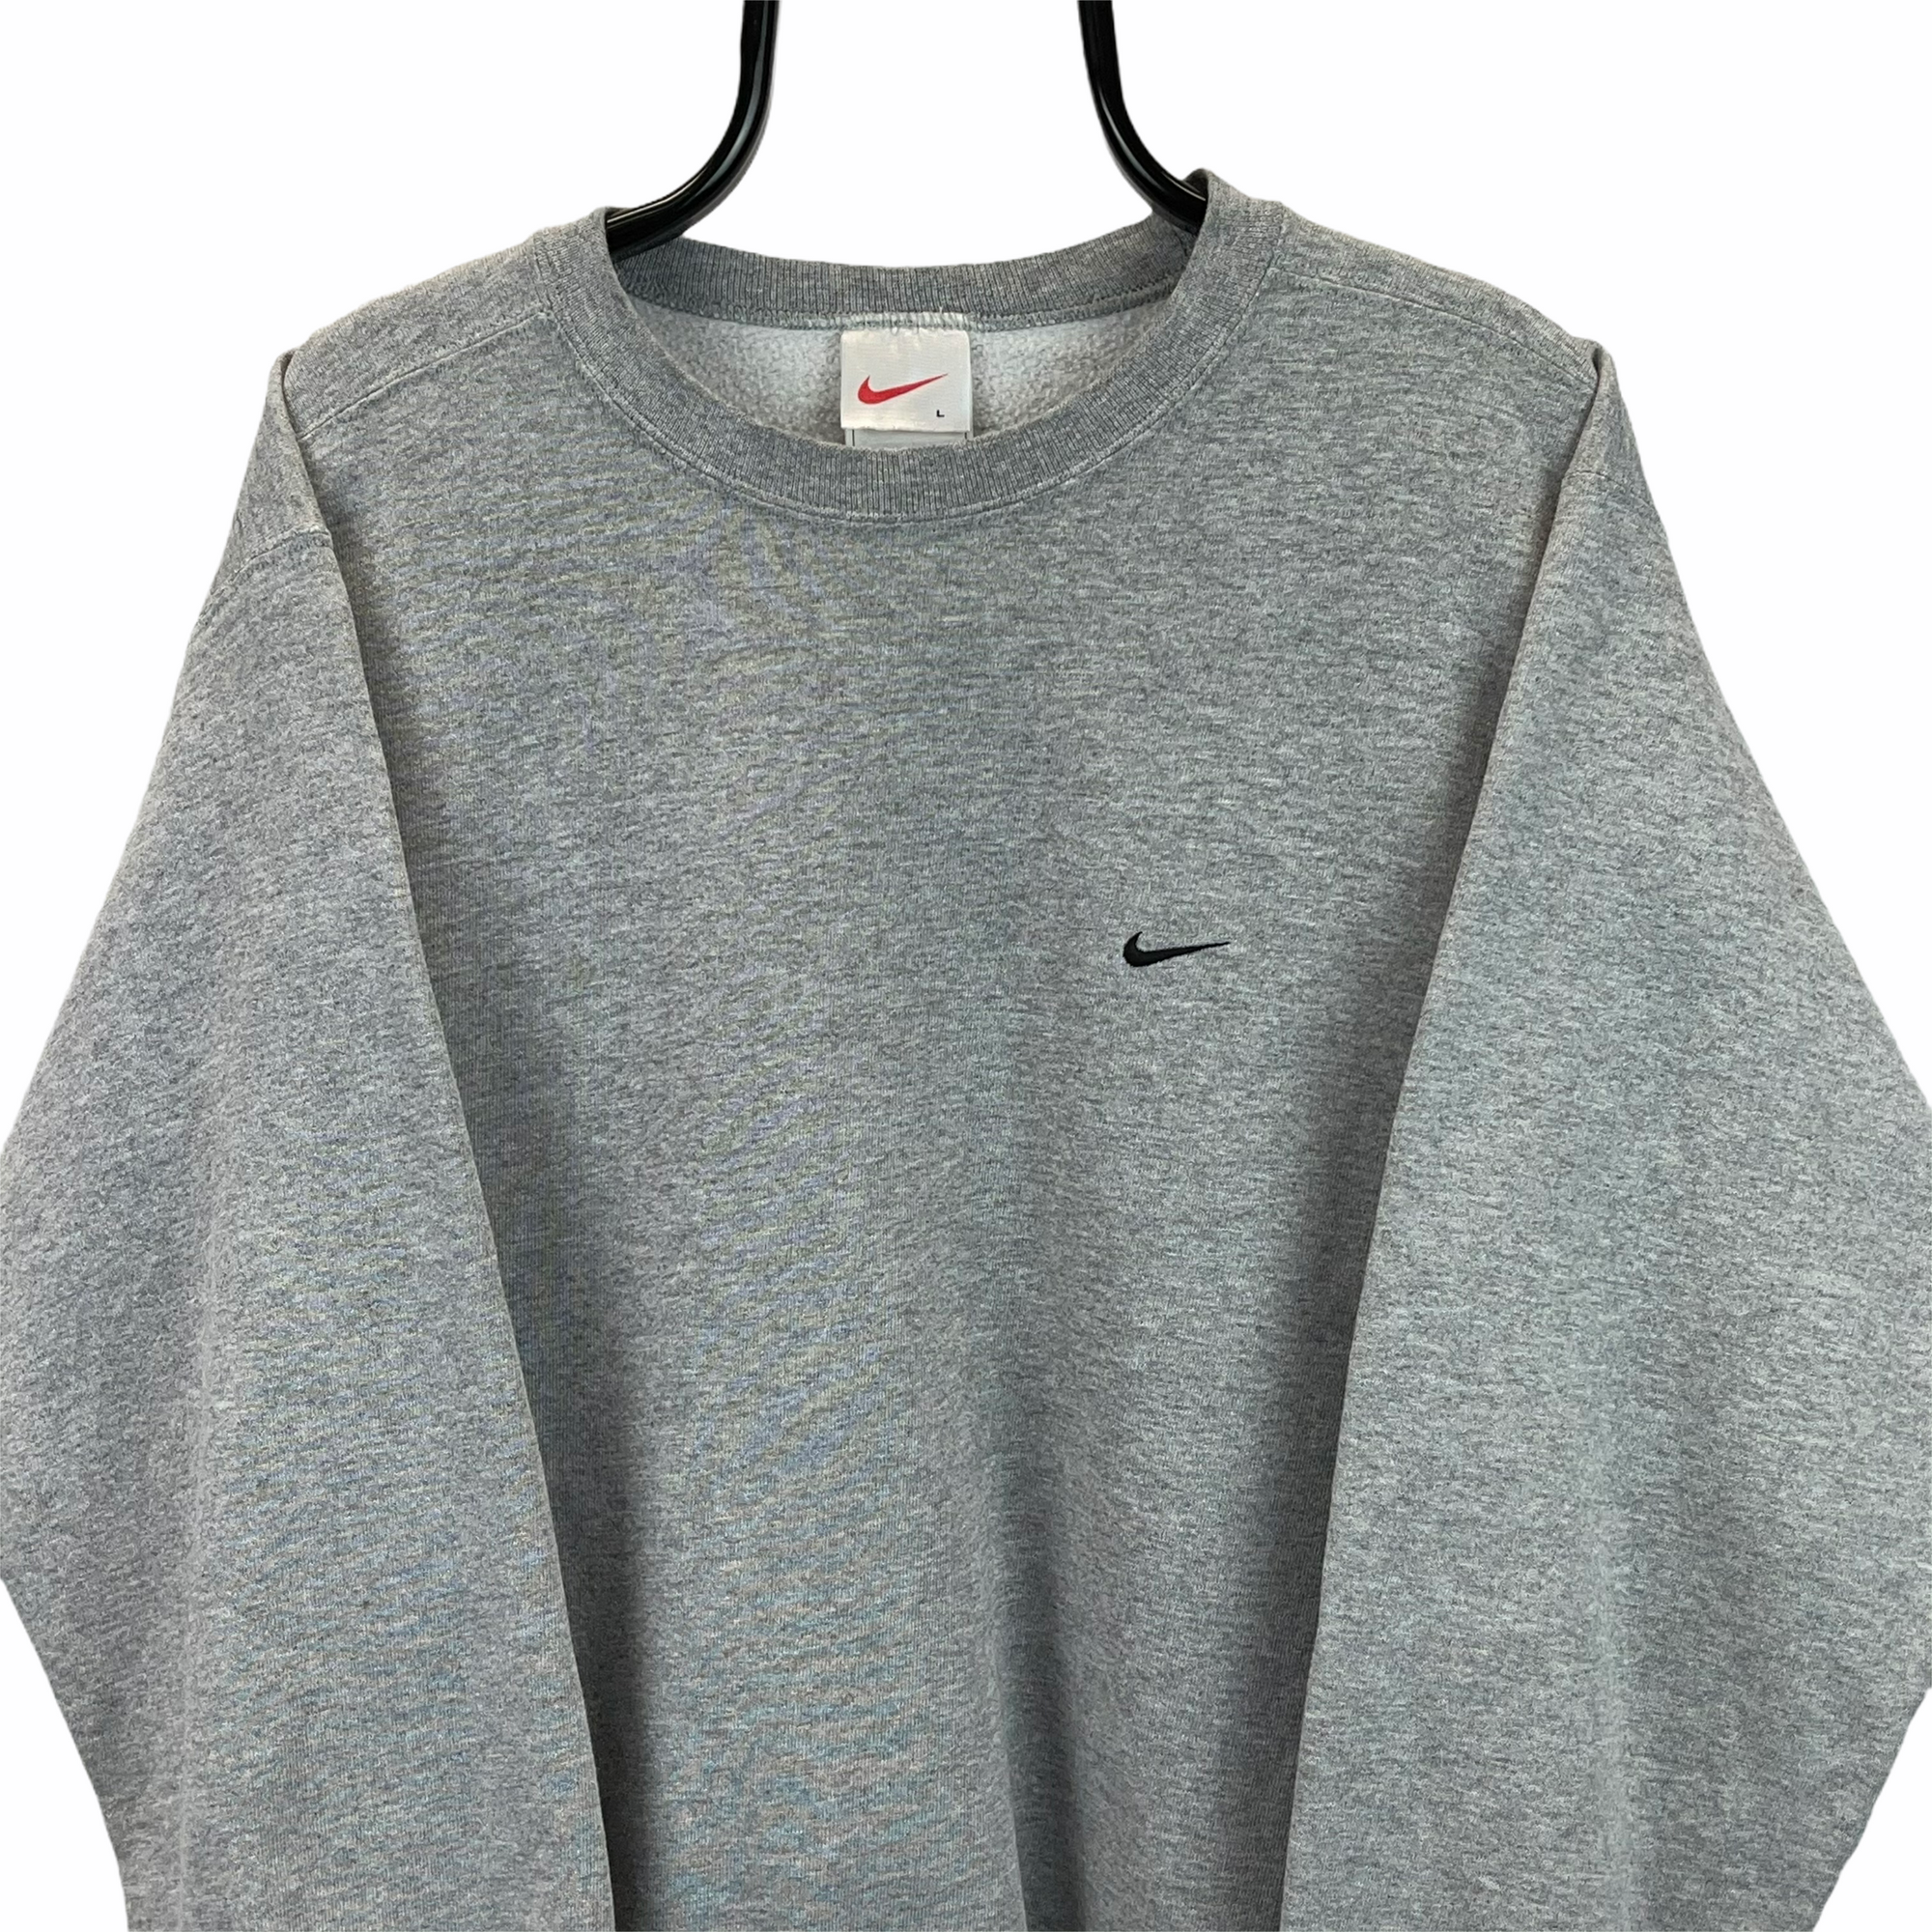 Vintage 90s Nike Embroidered Small Swoosh Sweatshirt in Grey - Men's Large/Women's XL